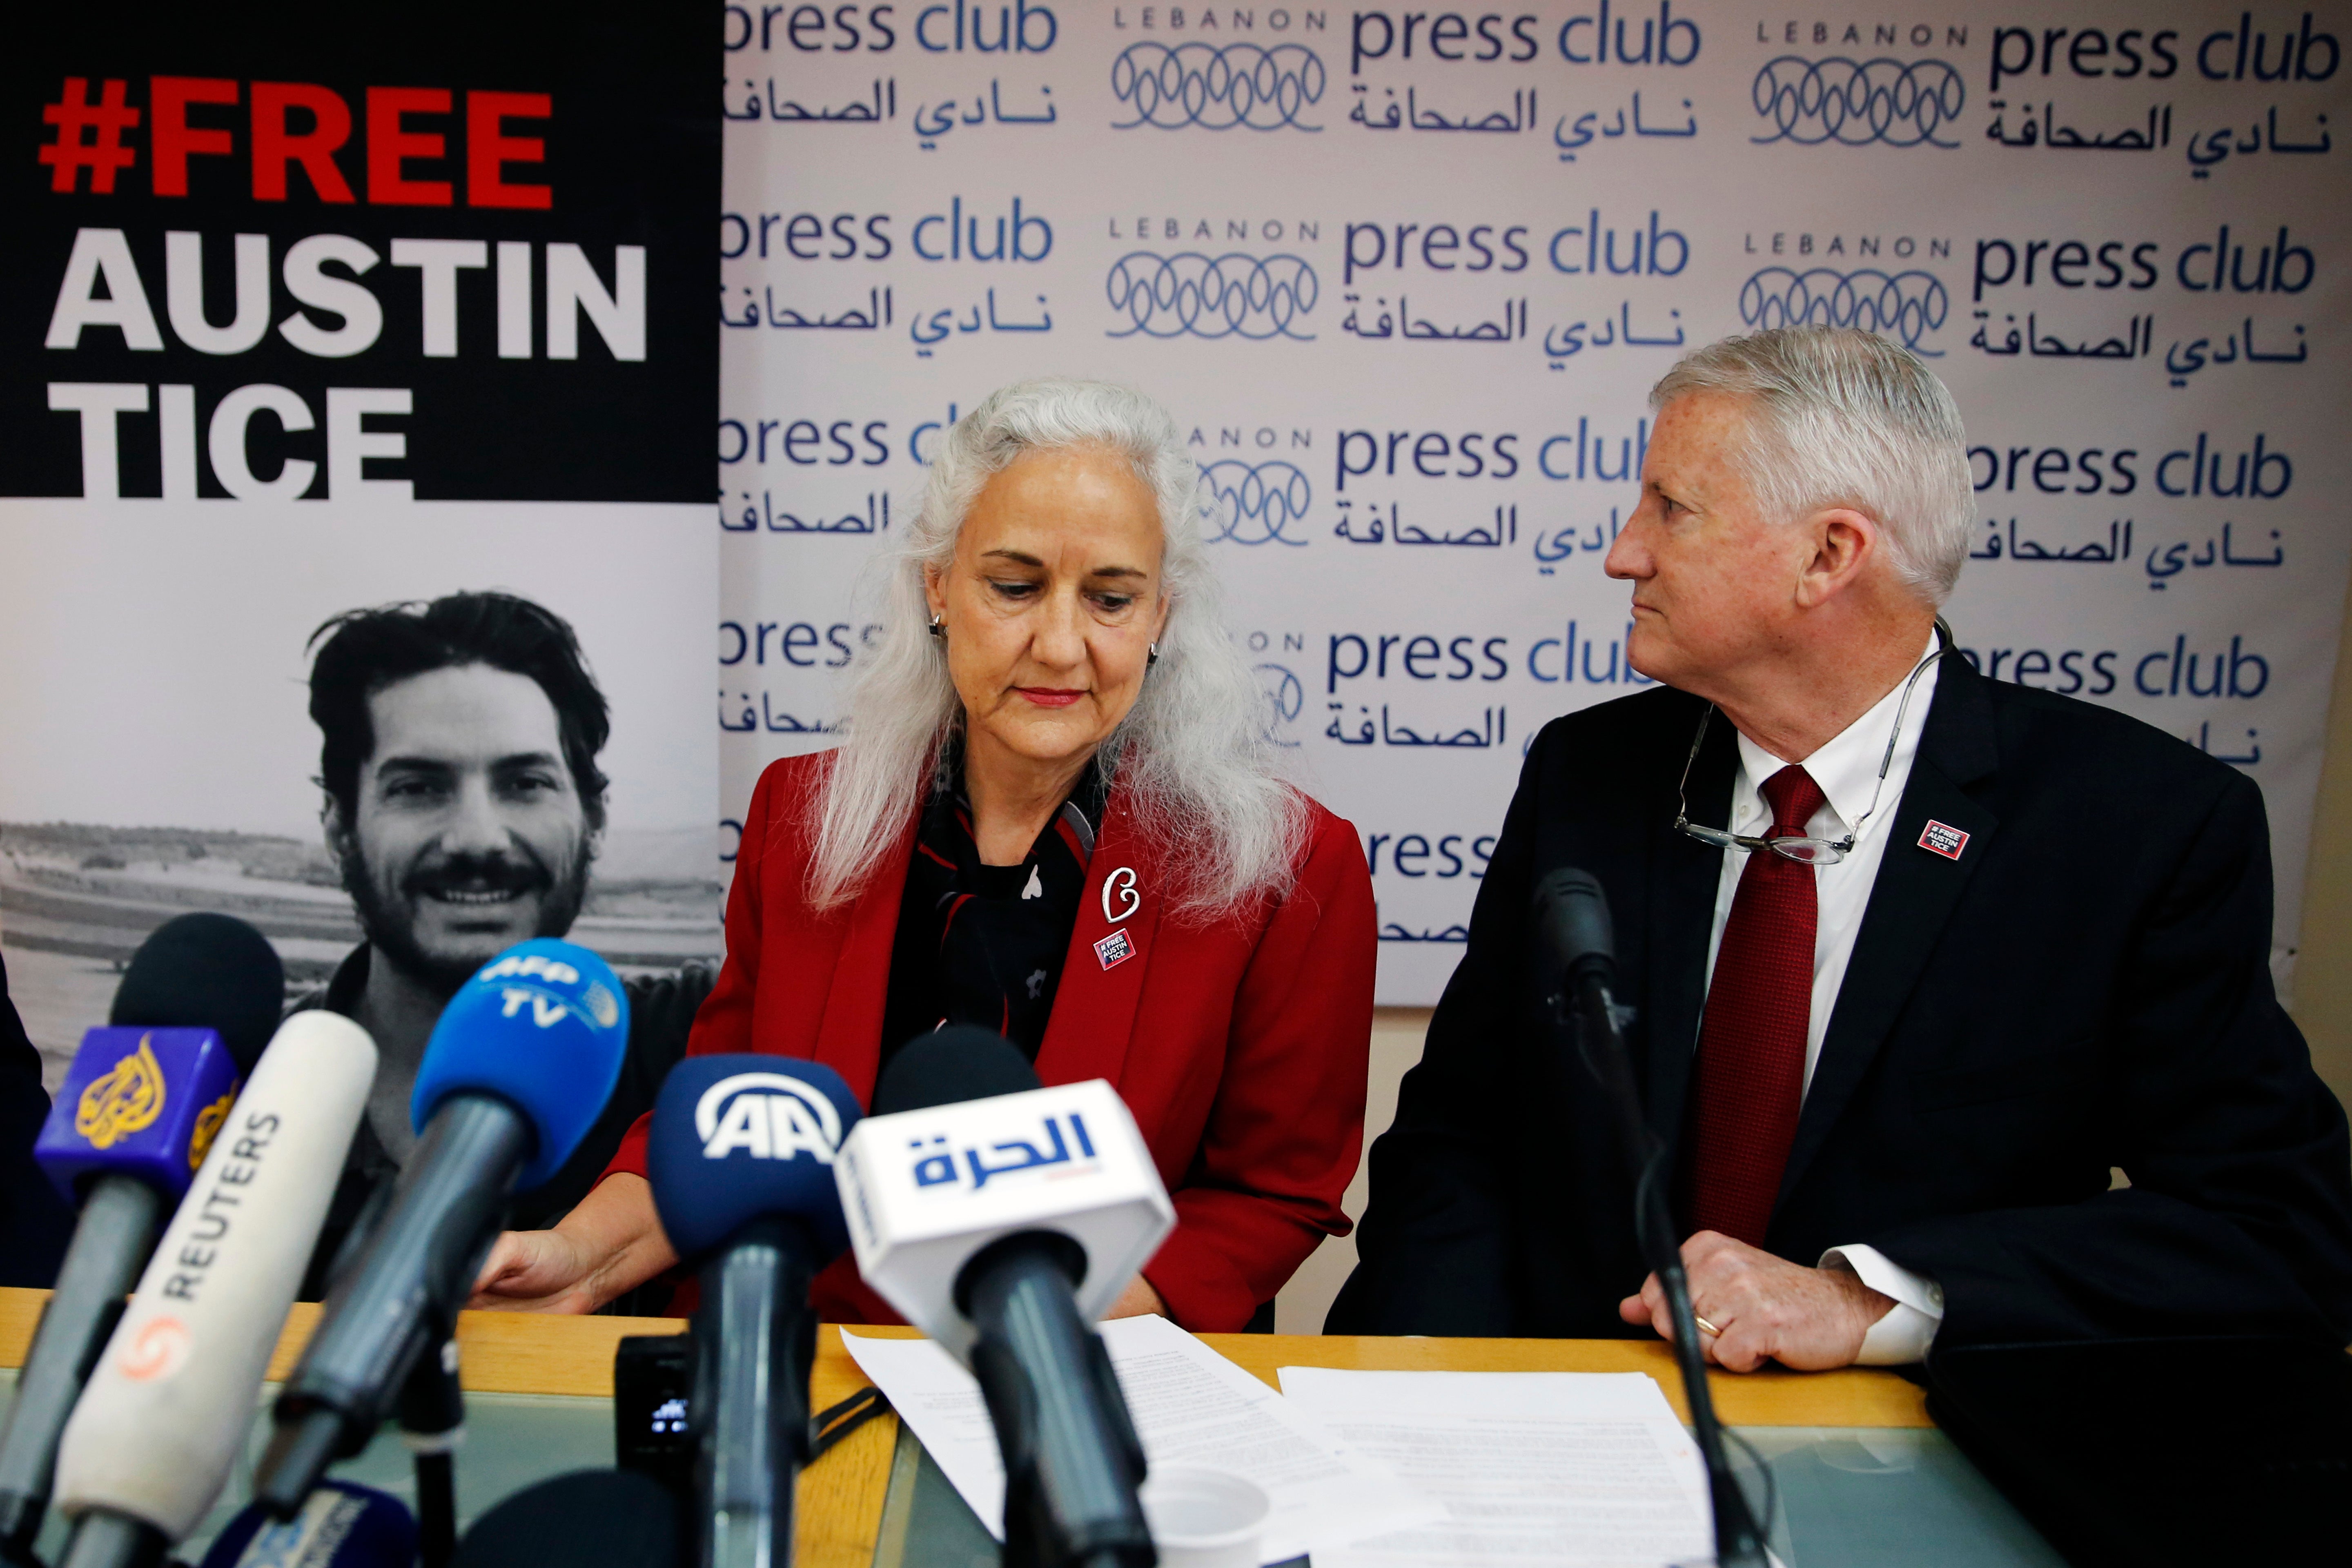 In this Dec. 4, 2018, file photo Marc and Debra Tice, the parents of Austin Tice, who is missing in Syria, speak during a press conference, at the Press Club, in Beirut, Lebanon.